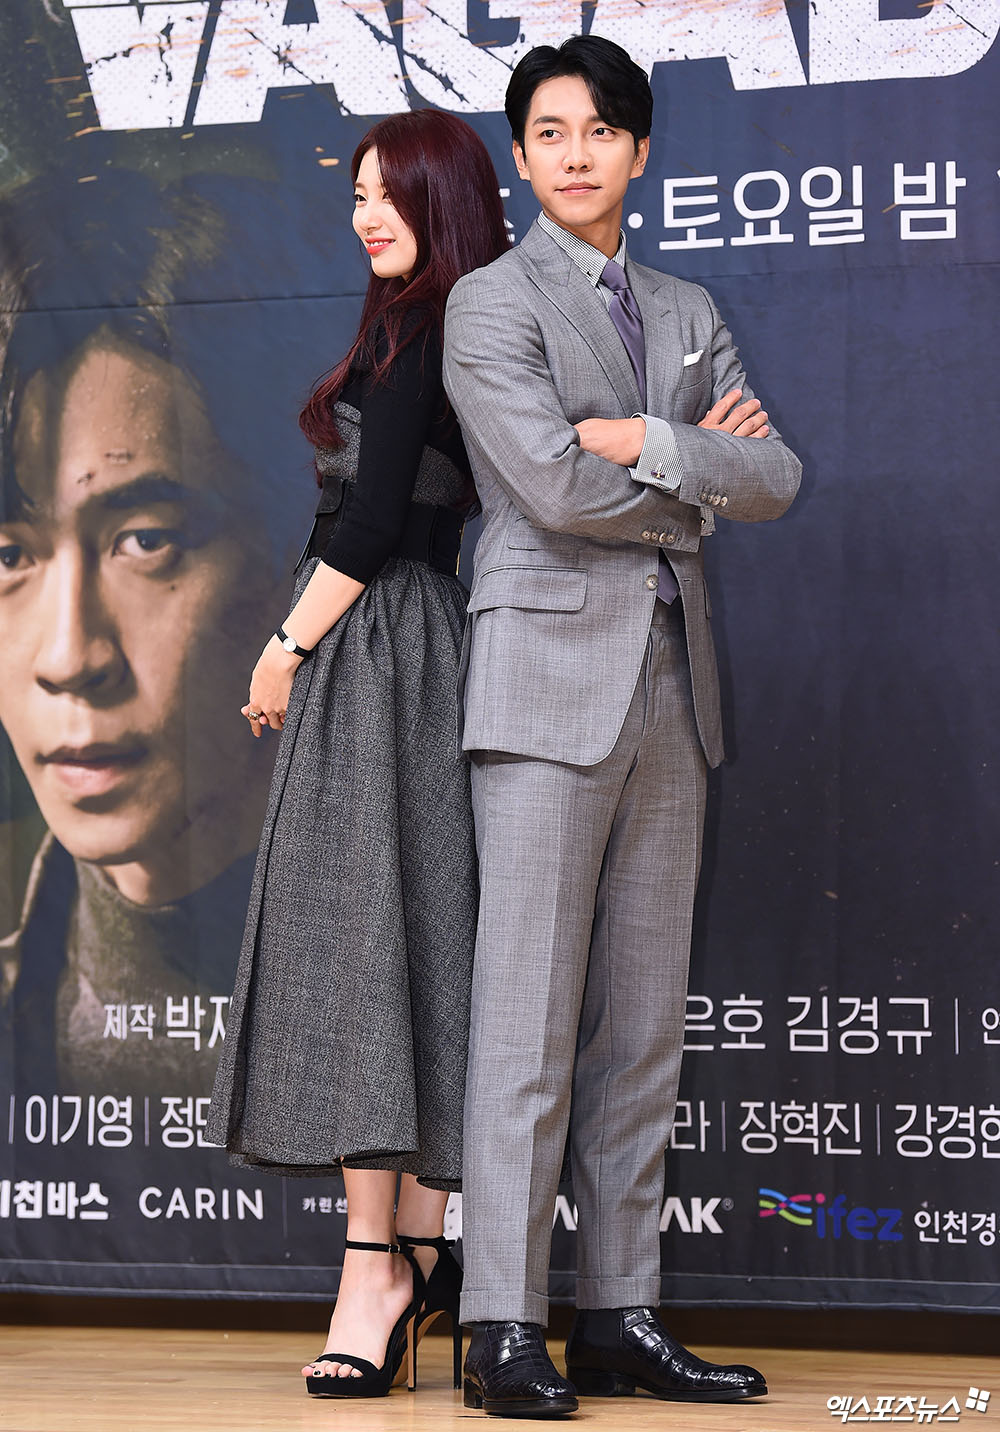 On the afternoon of the 16th, SBSs new gilt Jackson Vagabond production presentation was held at SBS in Mok-dong, Seoul.Vagabond is a Lamar Jackson who digs up a huge national corruption found in a concealed truth by a man involved in a civil airliner crash.It is an intelligence action melodrama with dangerous and naked adventures of Vagabond who have lost their families, affiliations, and even their names. It is a huge project that has been filming overseas rockets between Morocco and Portugal for over a year.Especially, Vagabond is a work that Lee Seung-gi and Bae Suzy reunite in six years after MBC Lamar Jackson Gu Family Book Book Book which ended in 2013.Lee Seung-gi and Bae Suzy have shown fantastic co-work in the Gu Family Book Book Book, playing the role of Shin Soo-gang and girl swordsman Dam-yul, and have proved their popularity by winning the Best Couple AwardBae Suzy and Lee Seung-gi meet in the field photo of MBC Wall Street Gu Family Book Book Book Book in 2013RhrrrrrrrrrrrrrrrrrrrrrrrrrrrrrrrrrrrrrrrrrrrrrrrrrrrrrrrrrrrLaughing, this is the best couple.Bae Suzy said: I have a lot of good memories when I co-work with my brother Lee Seung-gi for Gu Family Book Book Book Book Book Book Book Book; it was nice to see you when you said you were going to do it again.I was able to shoot easily with a good co-work. Lee Seung-gi said, I think it is not easy to do two works together.It was also good to be reunited with the representative female actor Bae Suzy and Vagabond. Bae Suzys acting side and Attitude were good, he said. I always worked positively when I shot.I think I had a lot of physical difficulties, but I think I shot Lamar Jackson easily because I was cool in acting without any frowning expression. Reunited for 6 Years with SBSs Lamar Jackson VagabondThe image of maturity.Still a visual couple.Meanwhile, Vagabond is scheduled to be broadcasted at 10 pm on the 20th.